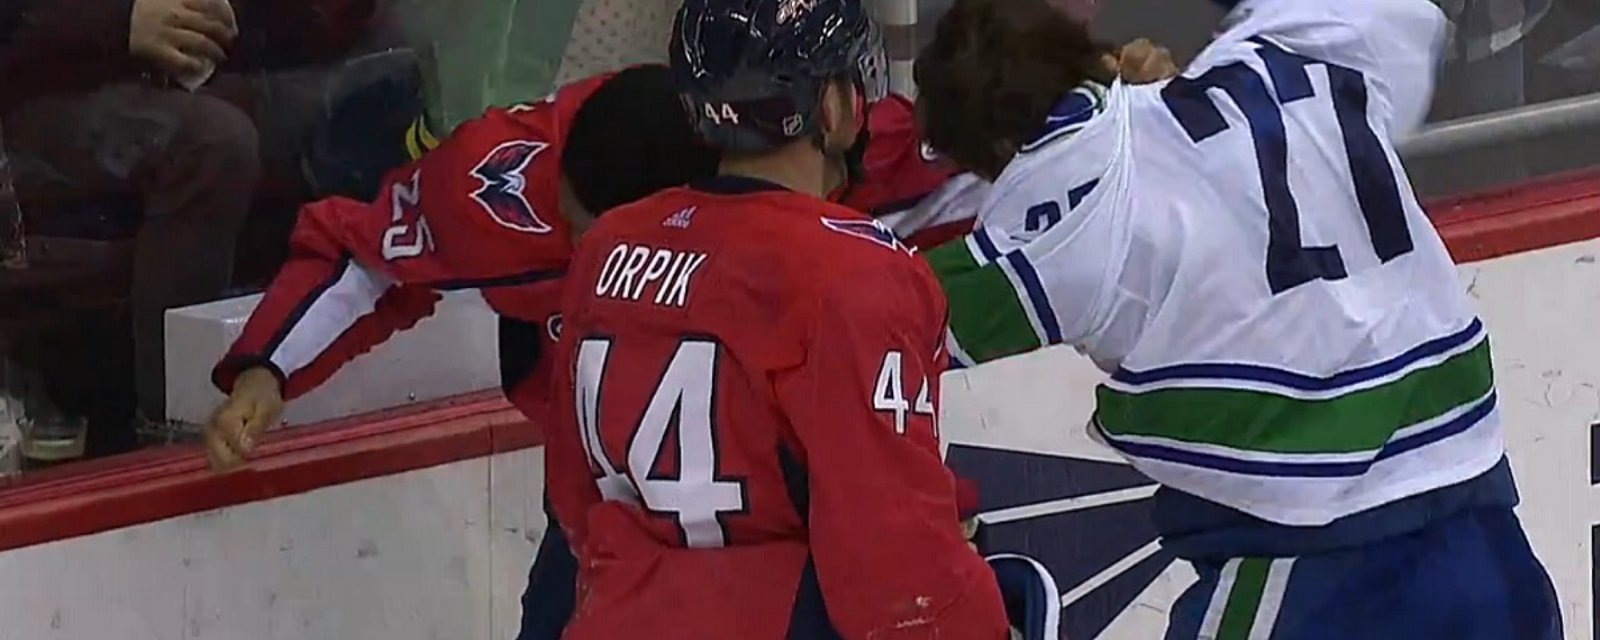 Hutton crushes Orpik then drops the gloves for a solid scrap. 